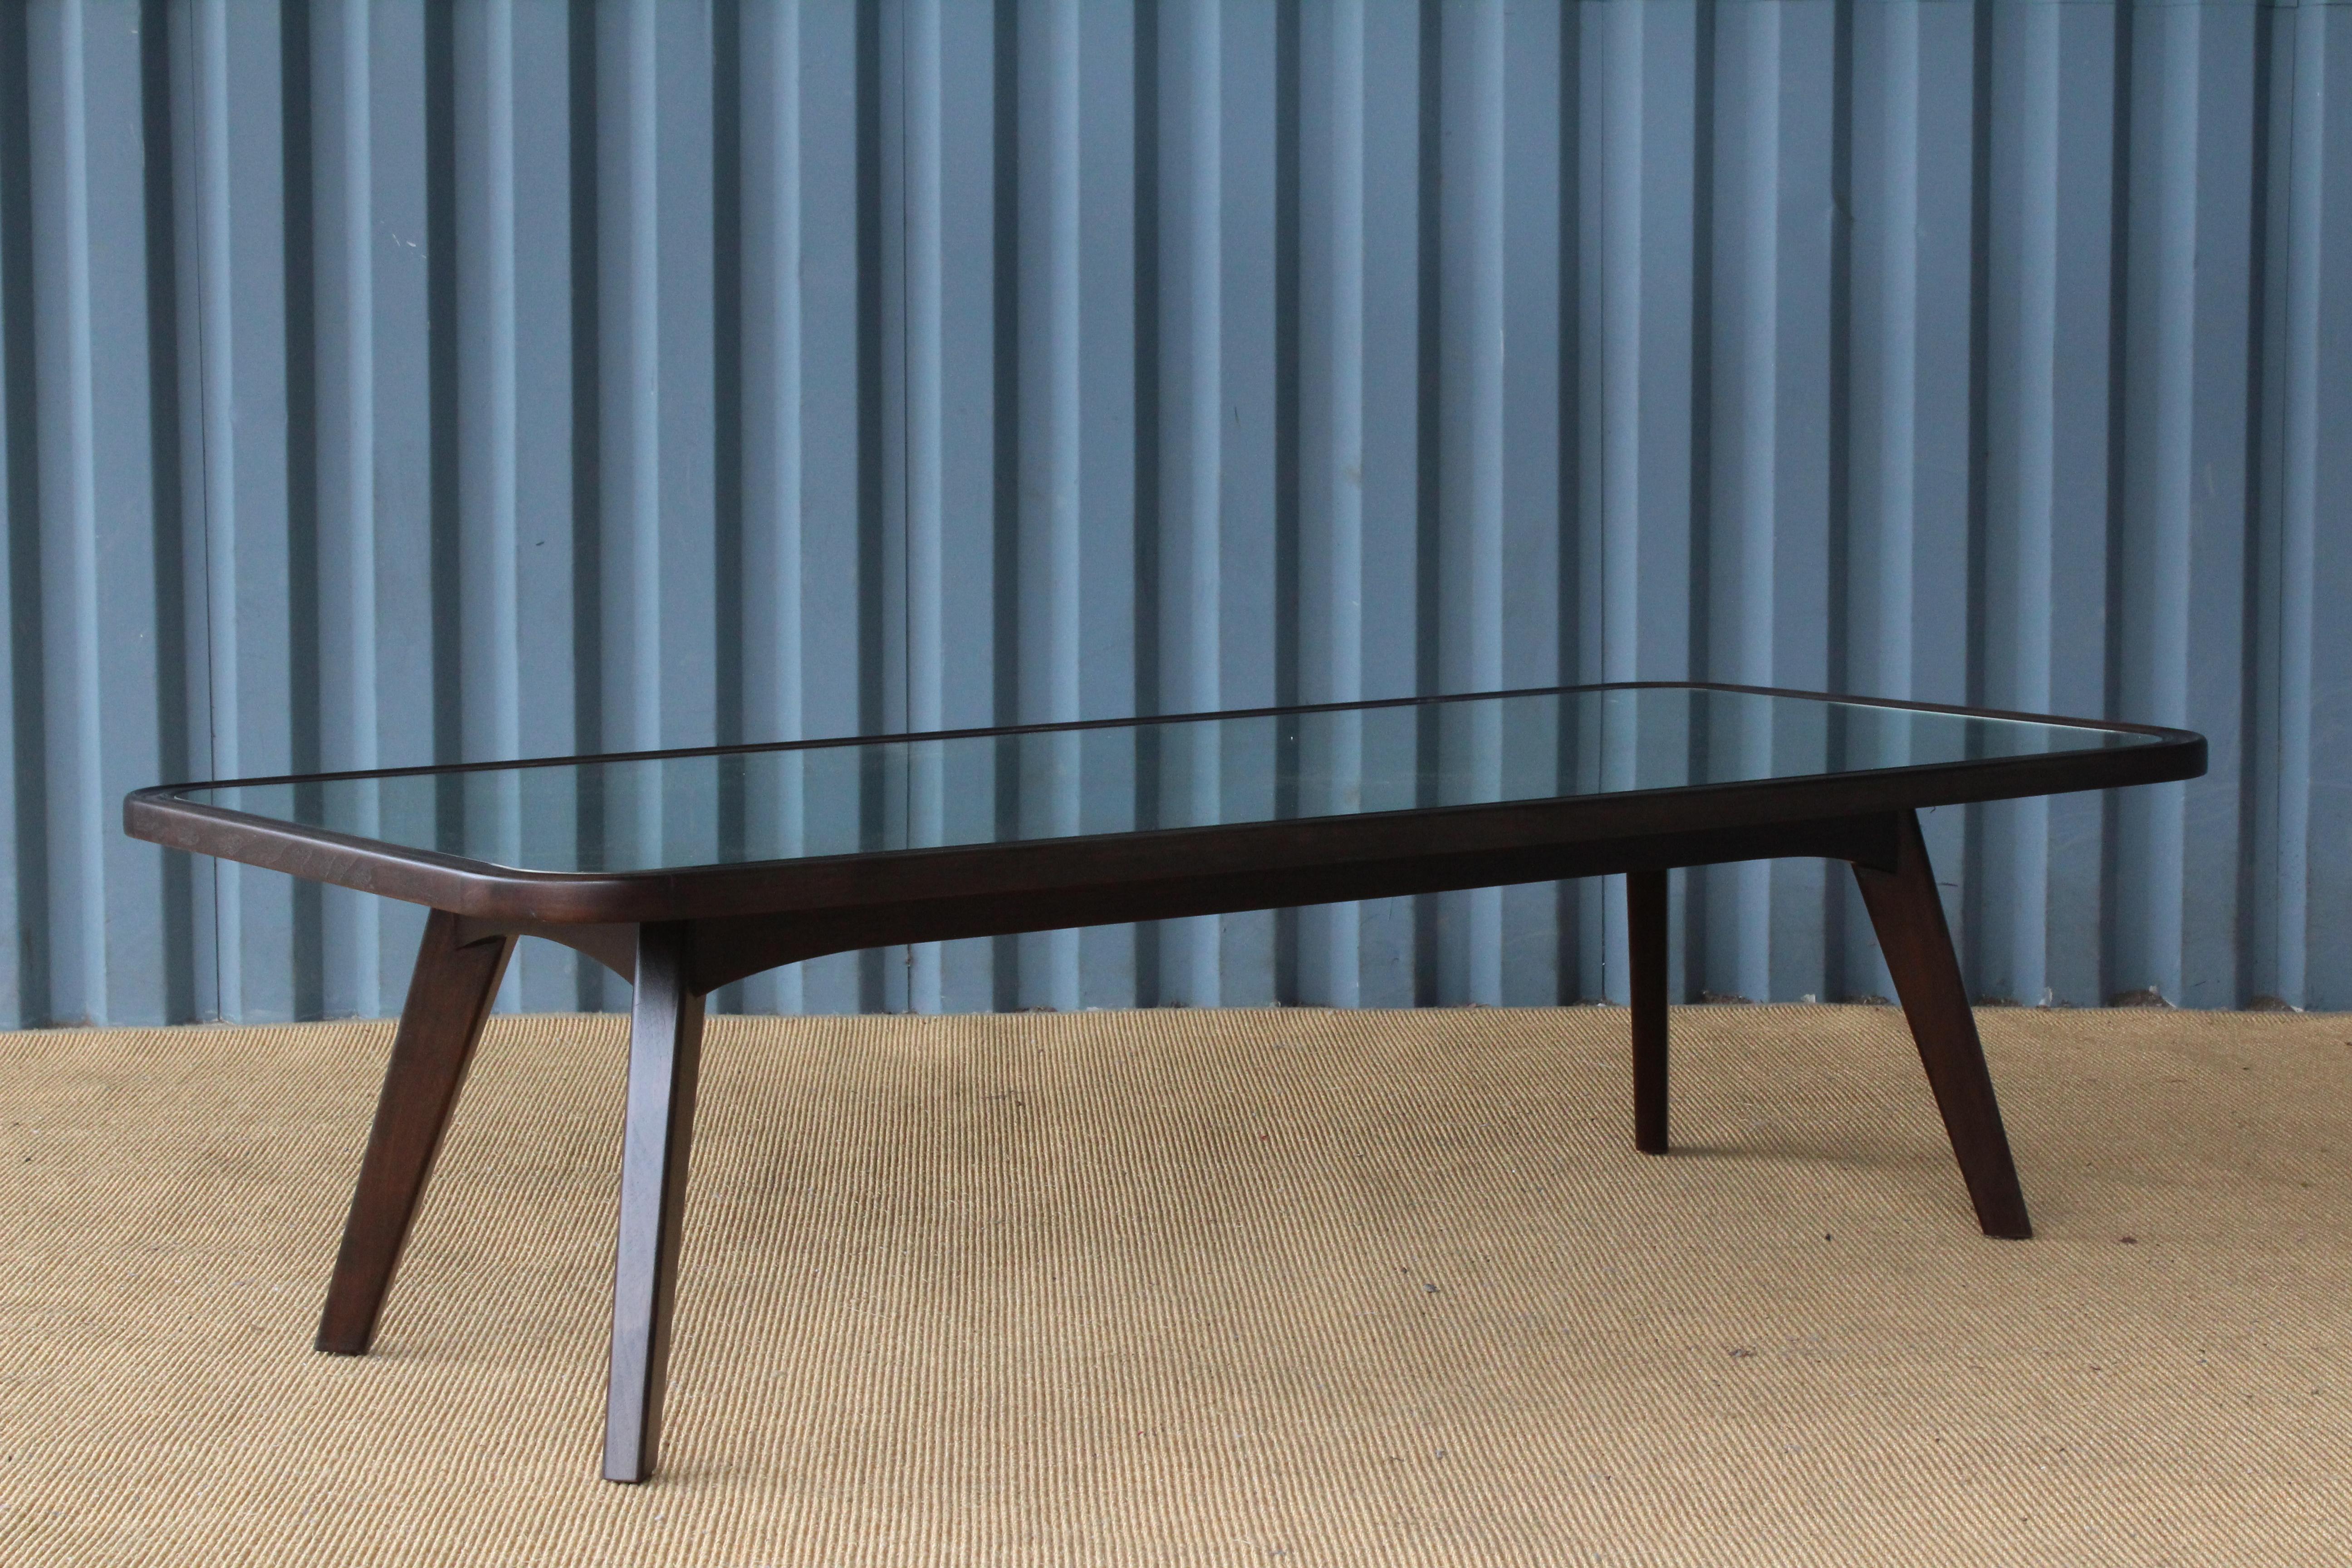 Custom midcentury style coffee table. Constructed in walnut with an antique mirrored top.